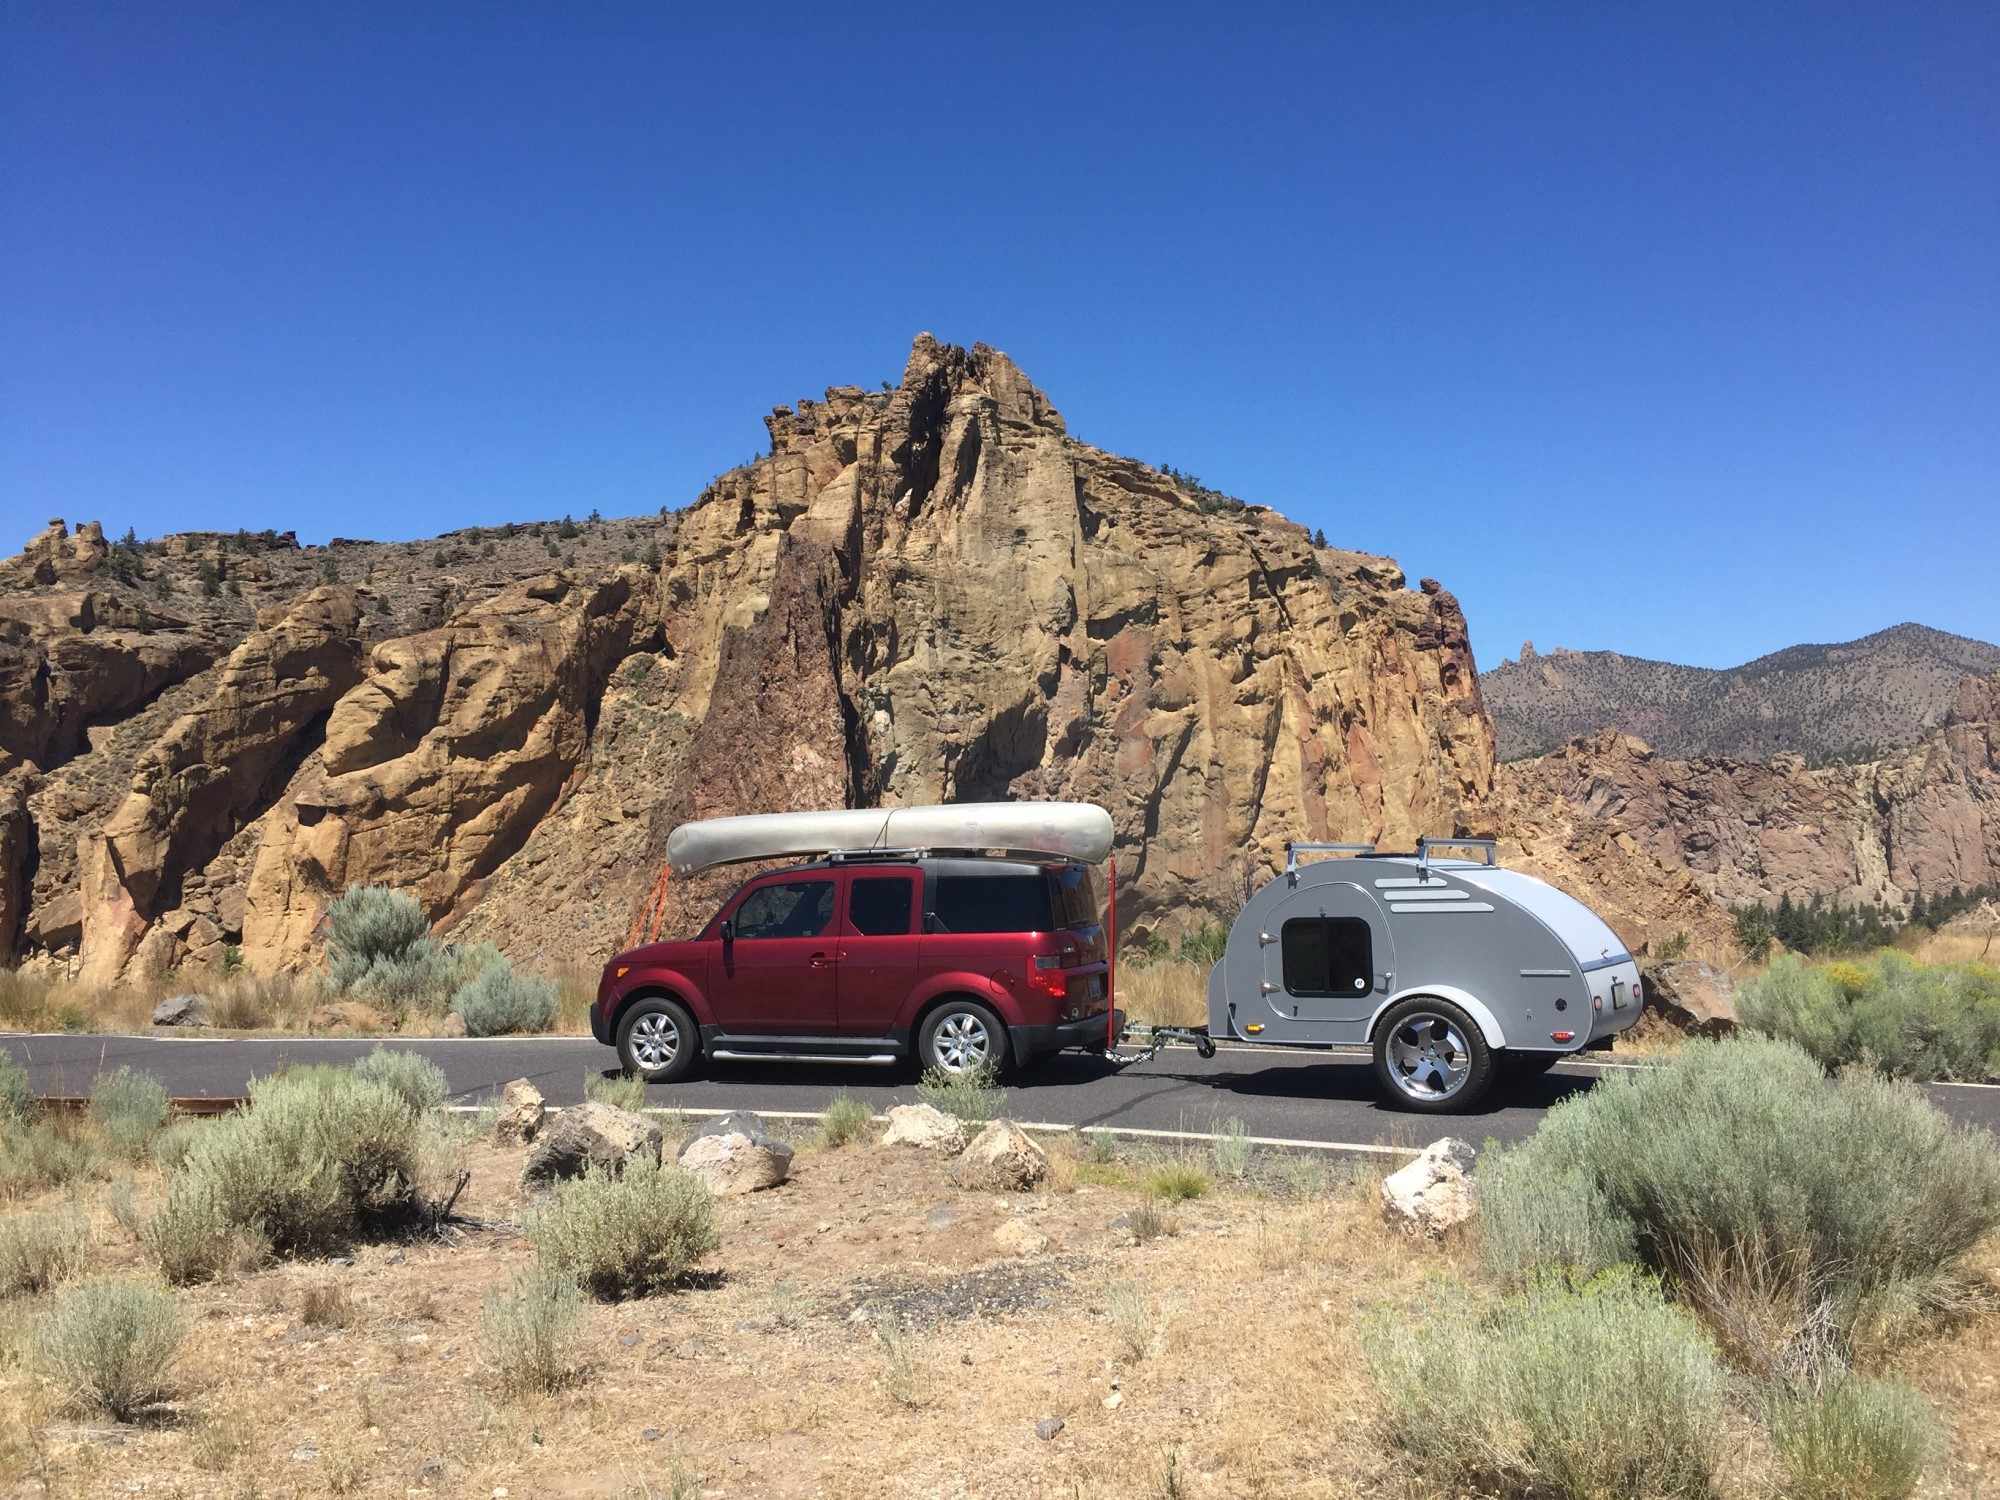 Pop-Ups vs. Teardrops: Which Camping Trailer Is Right For You?